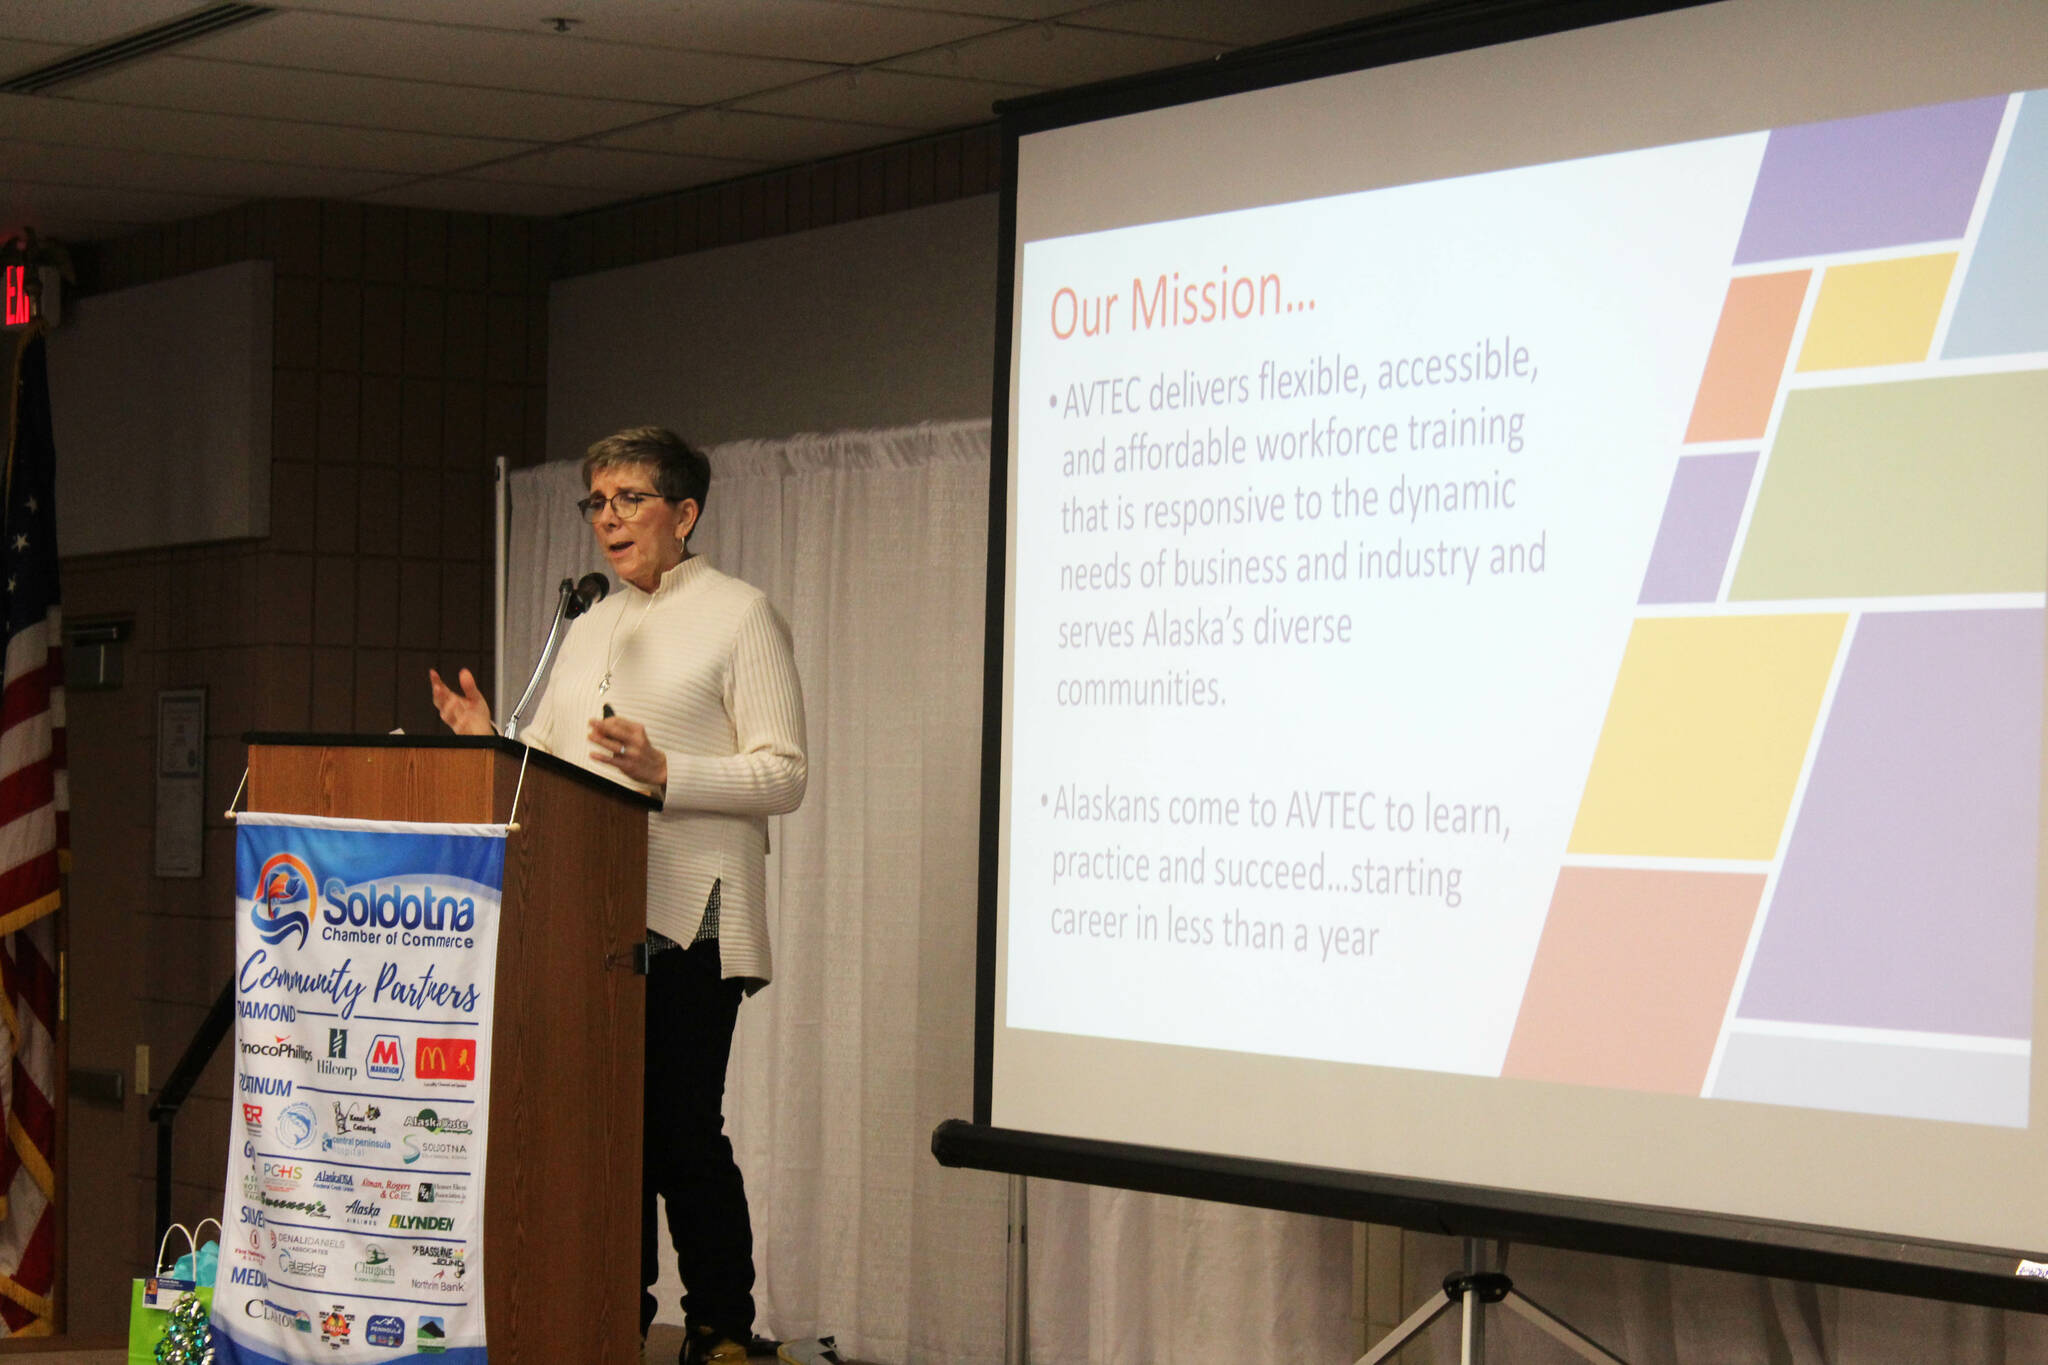 Alaska Vocational Technical Center Executive Director Cathy LeCompte presents during a Soldotna Chamber of Commerce luncheon at the Soldotna Regional Sports Complex on Wednesday, Jan. 25, 2023, in Soldotna, Alaska. (Ashlyn O’Hara/Peninsula Clarion)